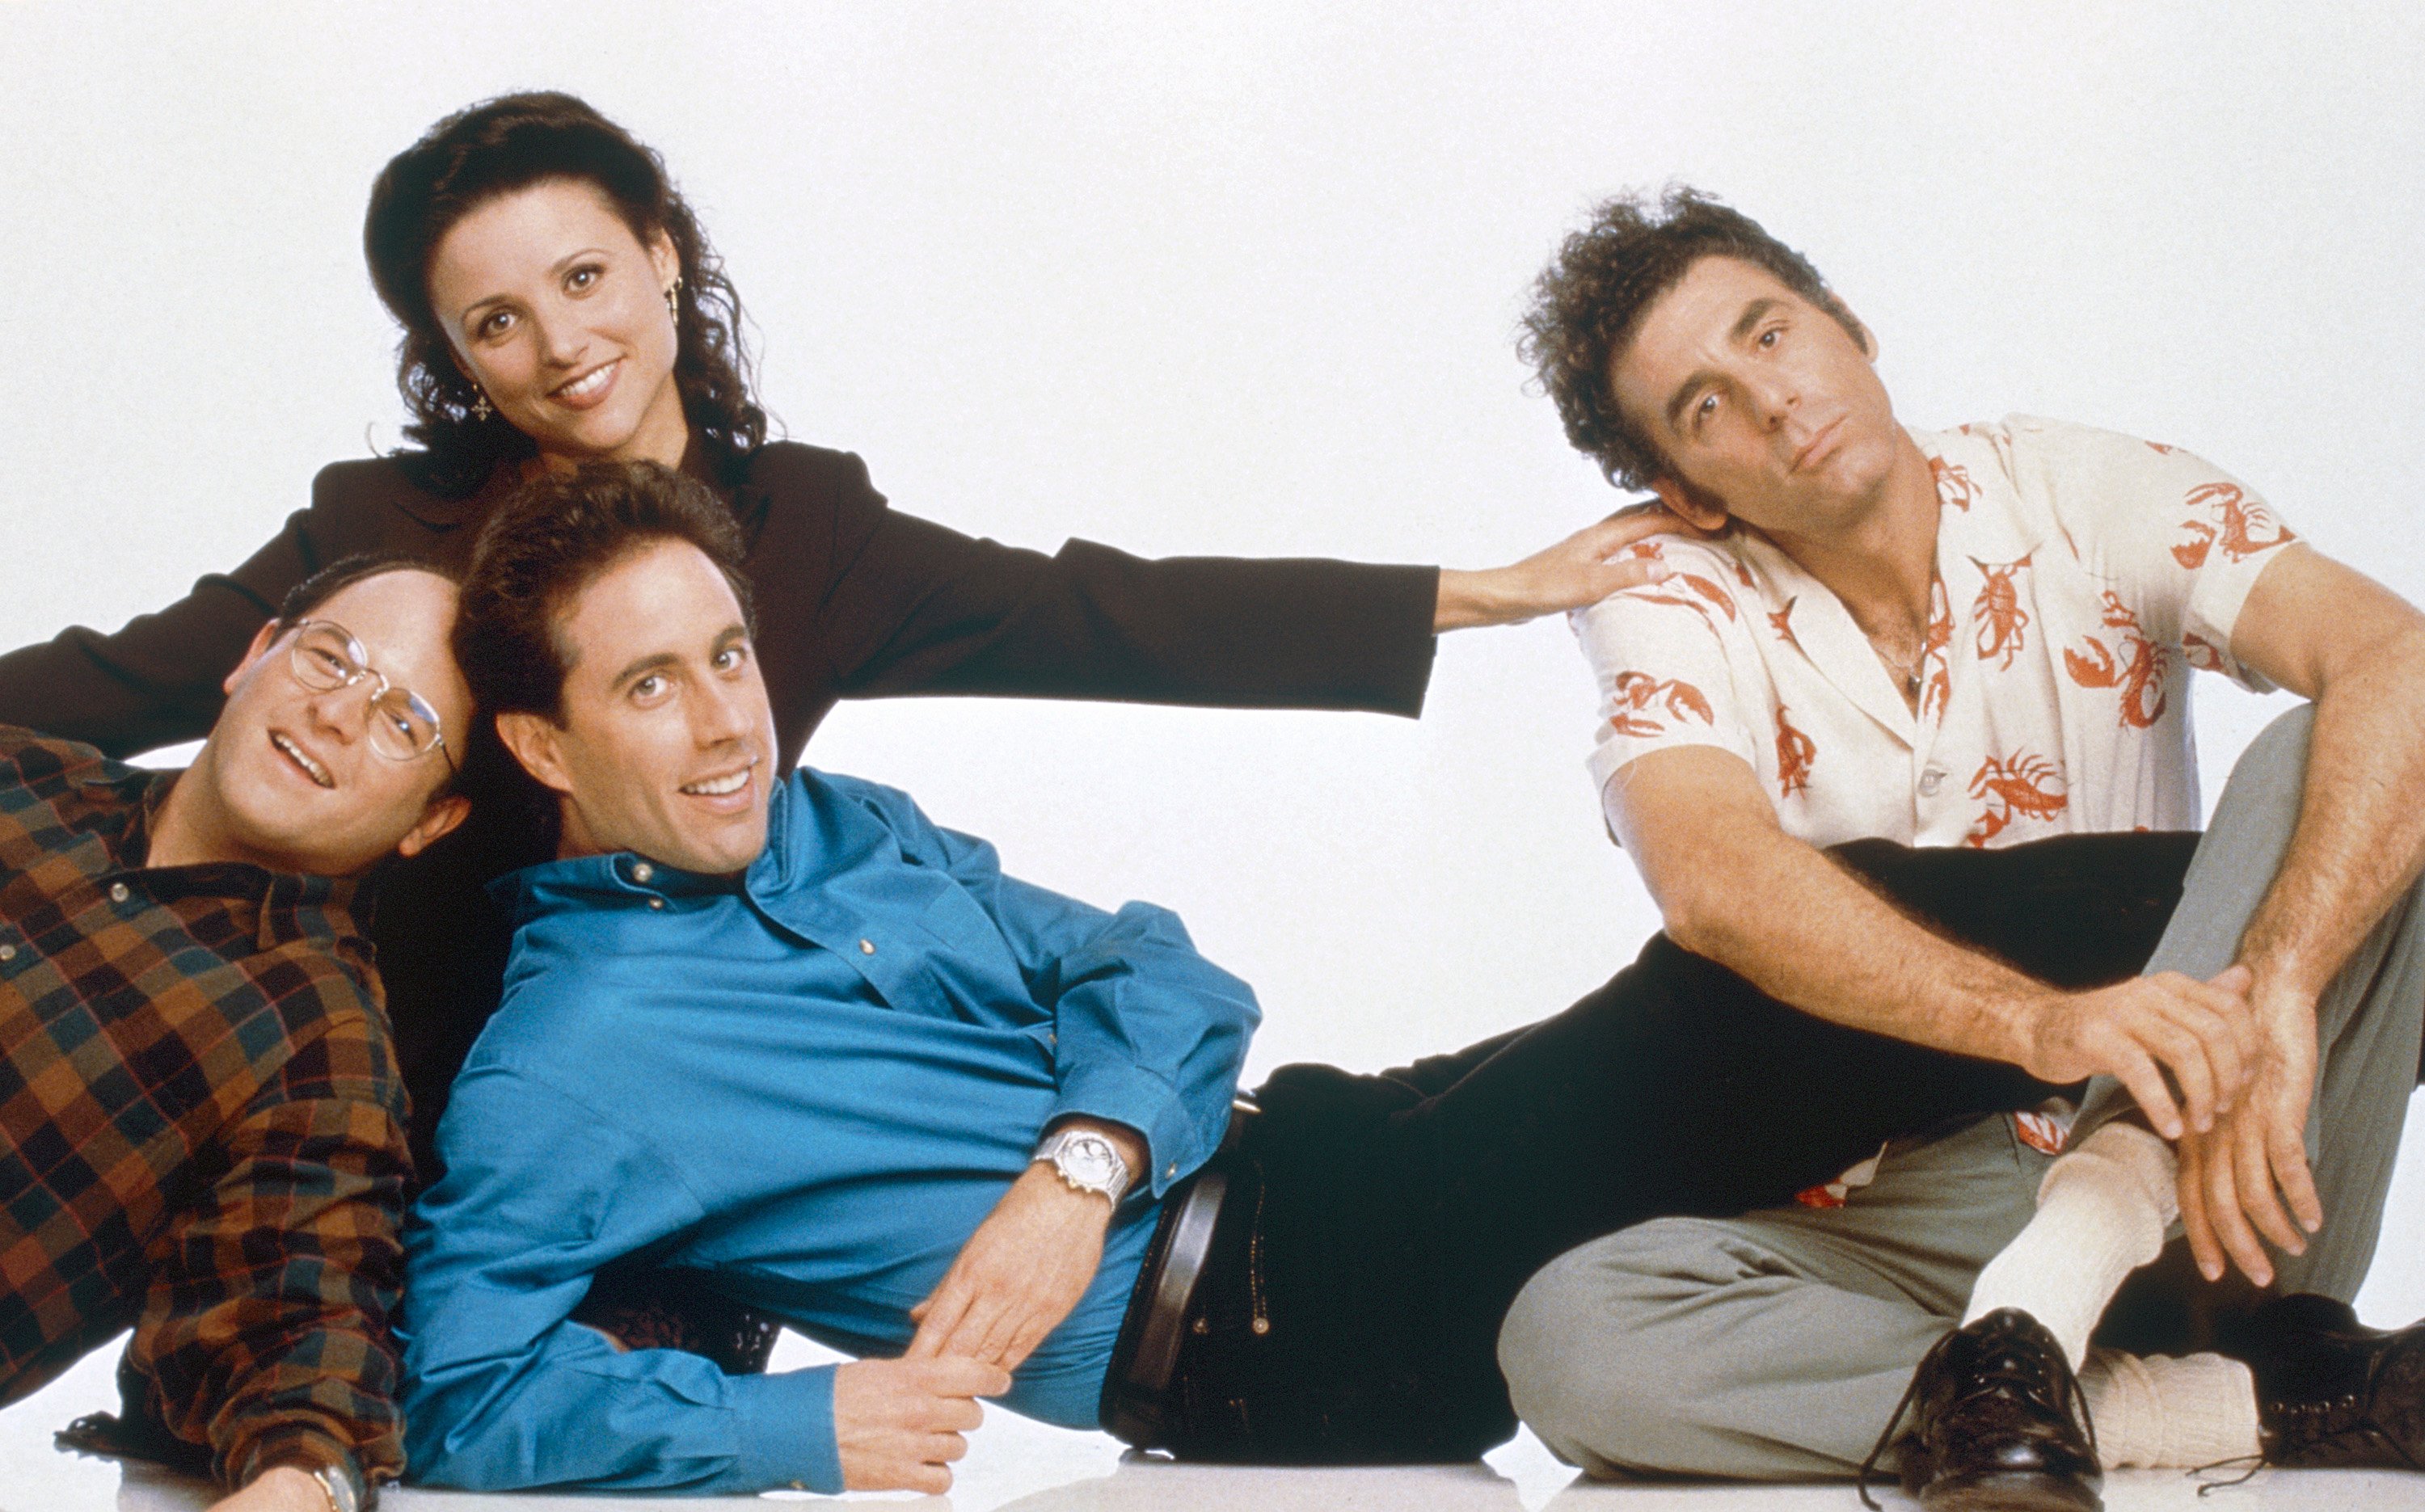 Jason Alexander as George Costanza, Jerry Seinfeld as Jerry Seinfeld, Julia Louis-Dreyfus as Elaine Benes and Michael Richards as Cosmo Kramer in a promotional photo for 'Seinfeld'